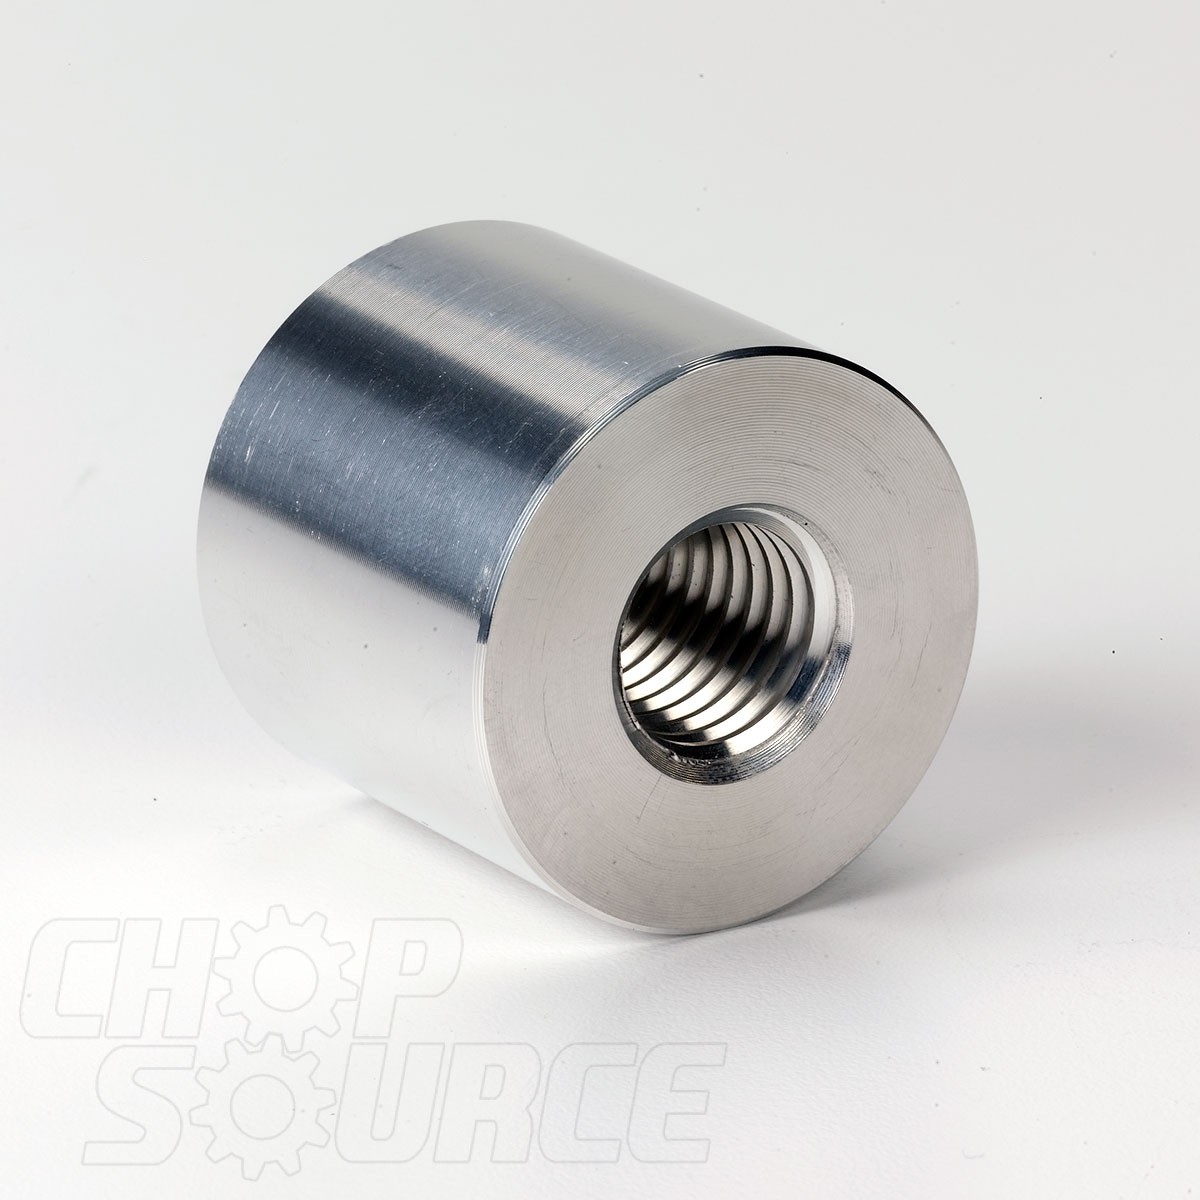 Threaded spacer for chop source frame jig neck fixture